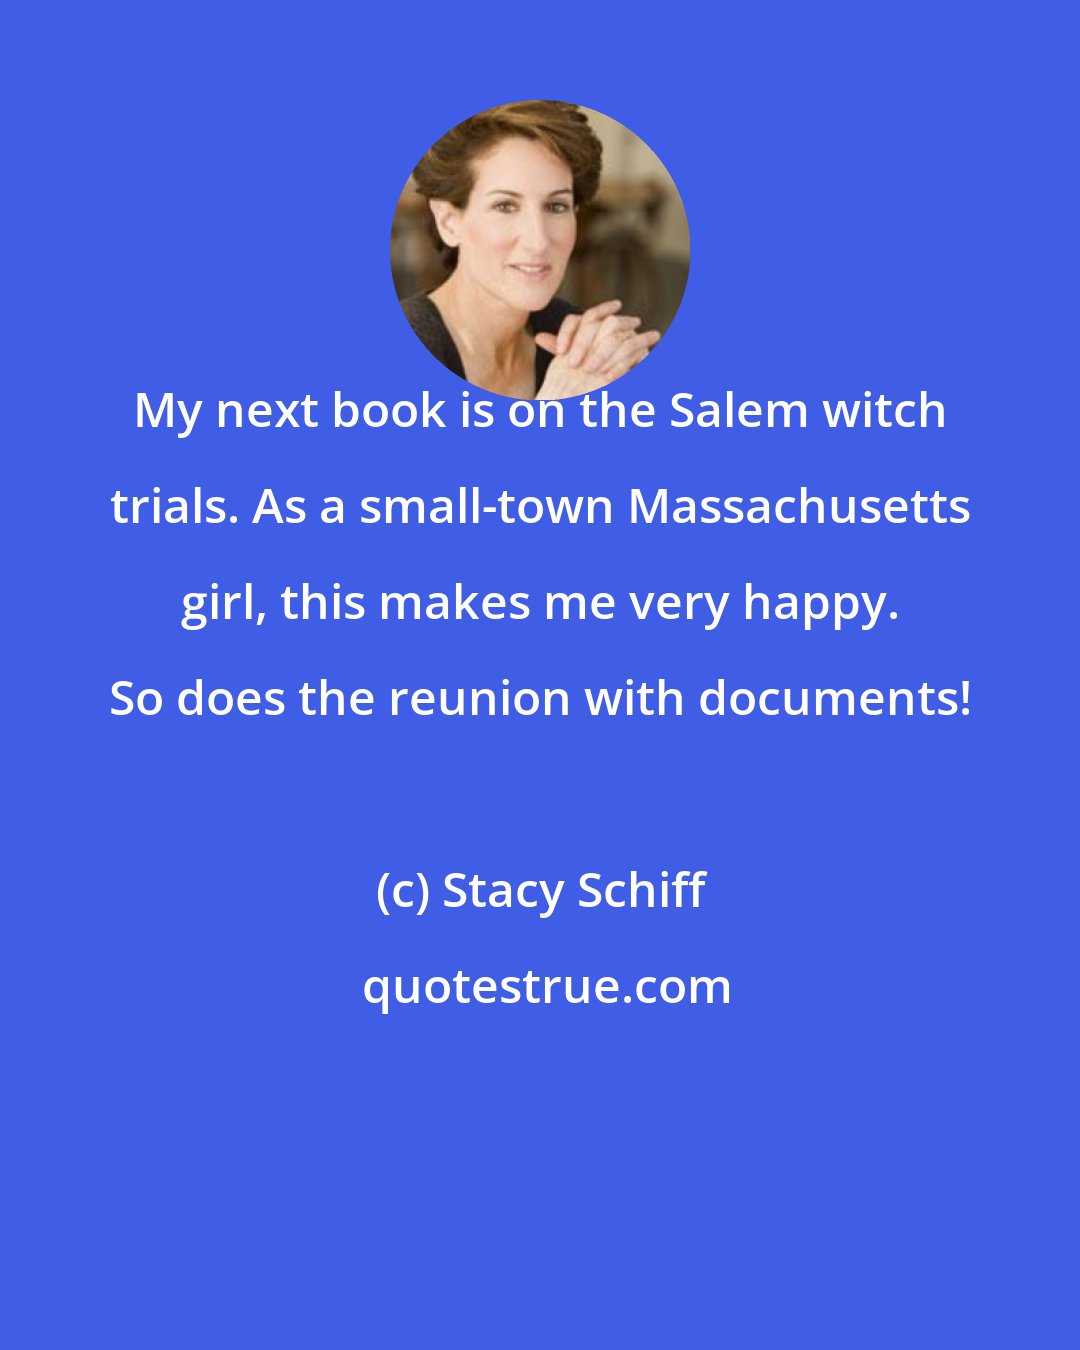 Stacy Schiff: My next book is on the Salem witch trials. As a small-town Massachusetts girl, this makes me very happy. So does the reunion with documents!